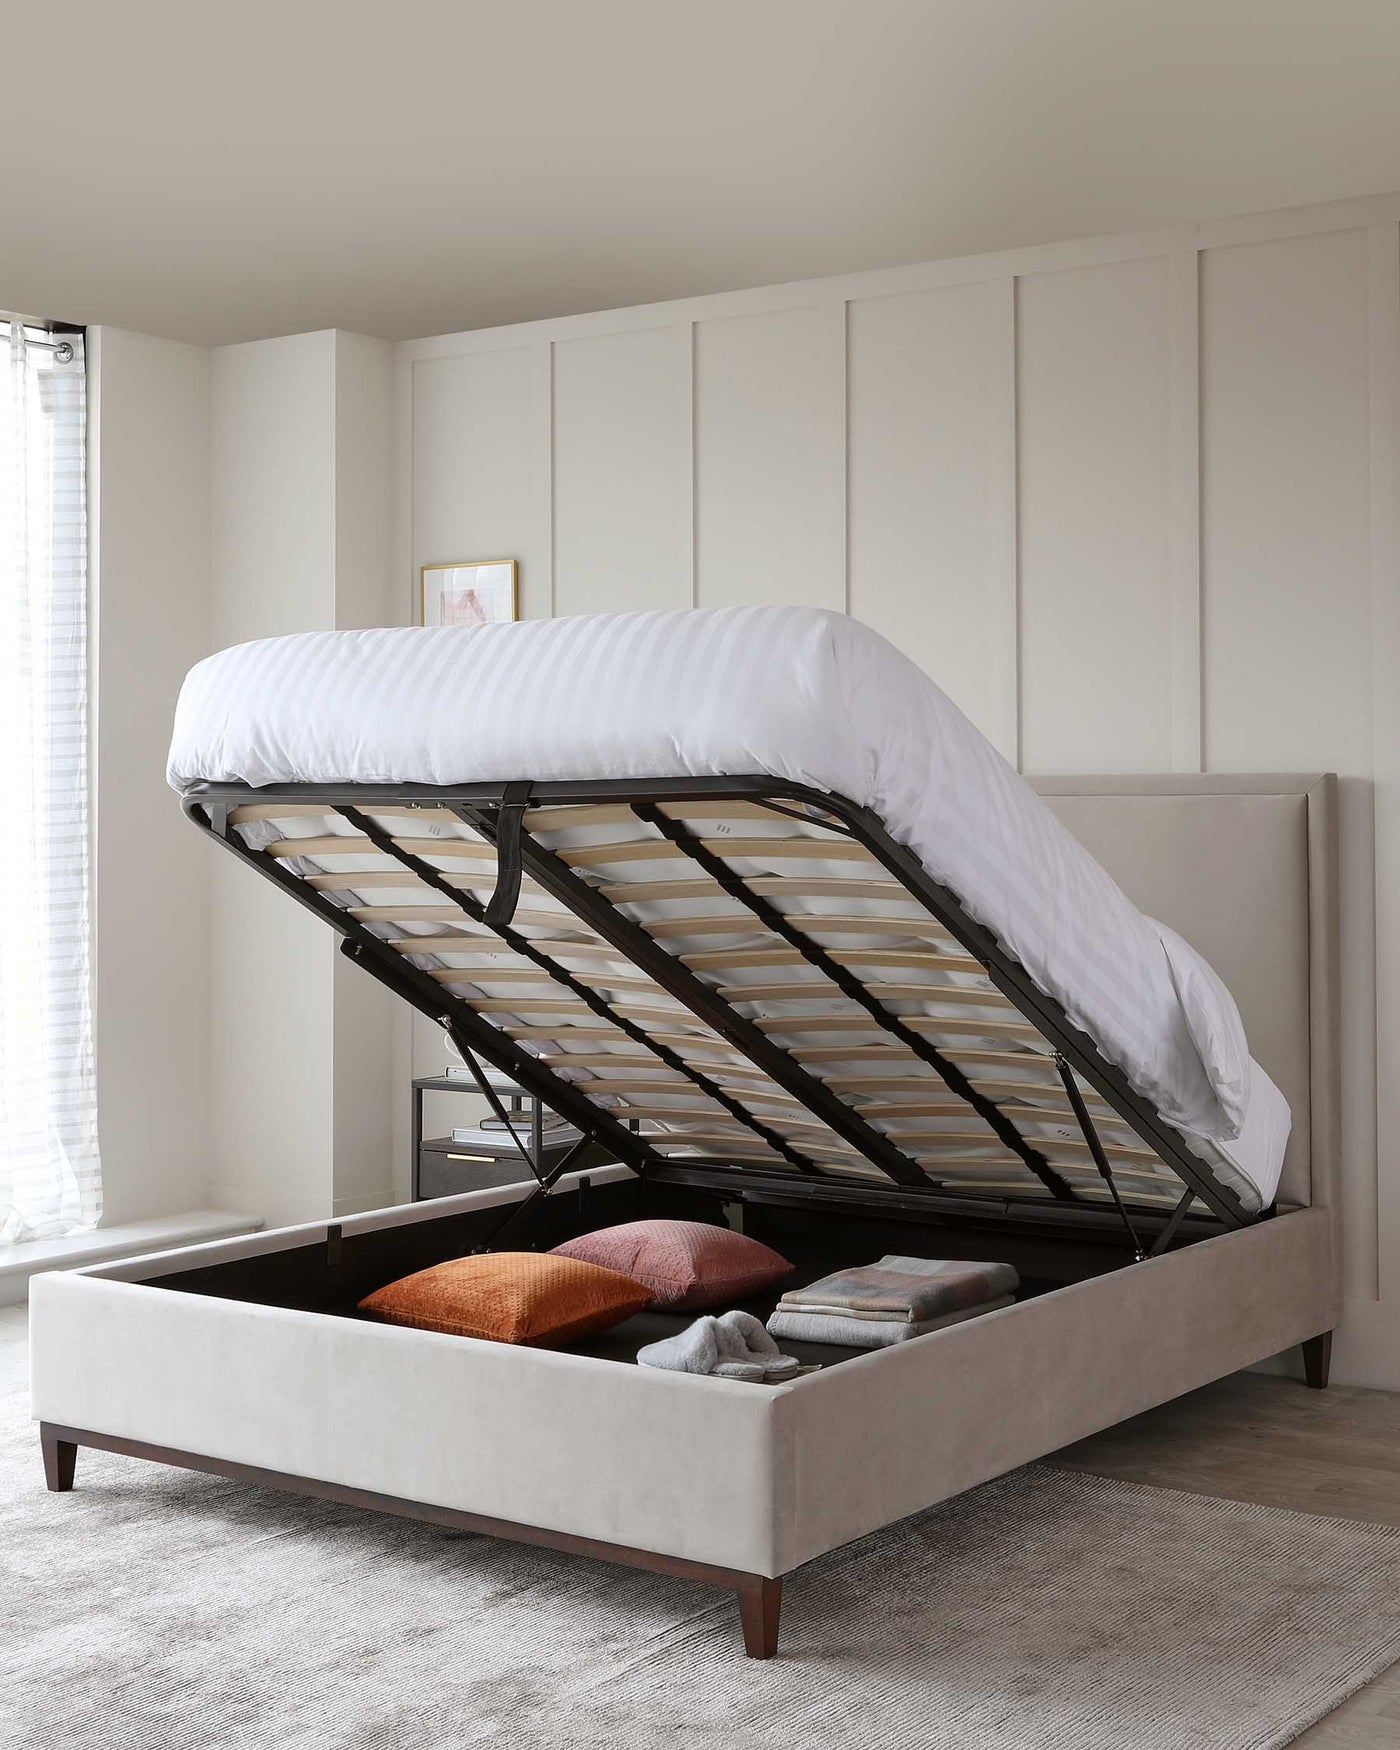 Contemporary upholstered storage bed with a lifting frame revealing a spacious compartment, set in a softly lit neutral bedroom.